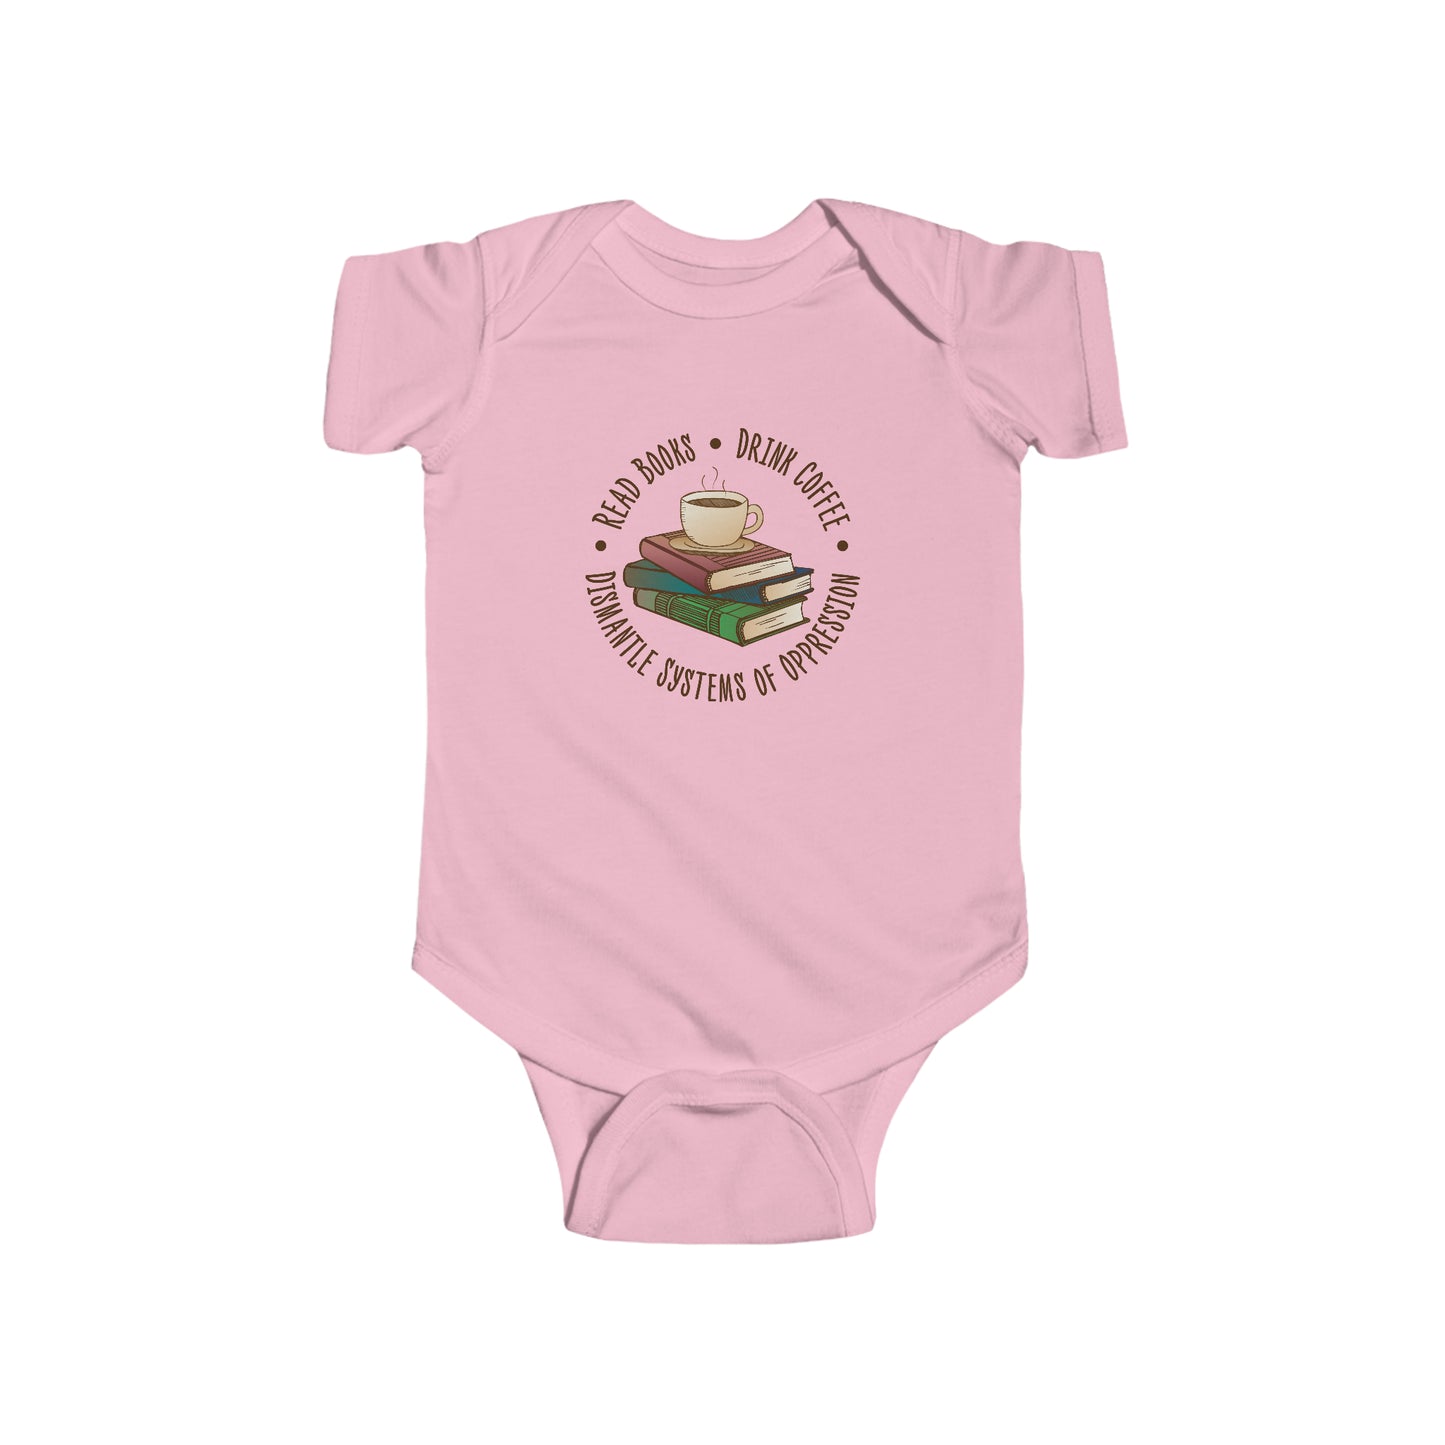 “Dismantle Systems of Oppression” Infant Onesie